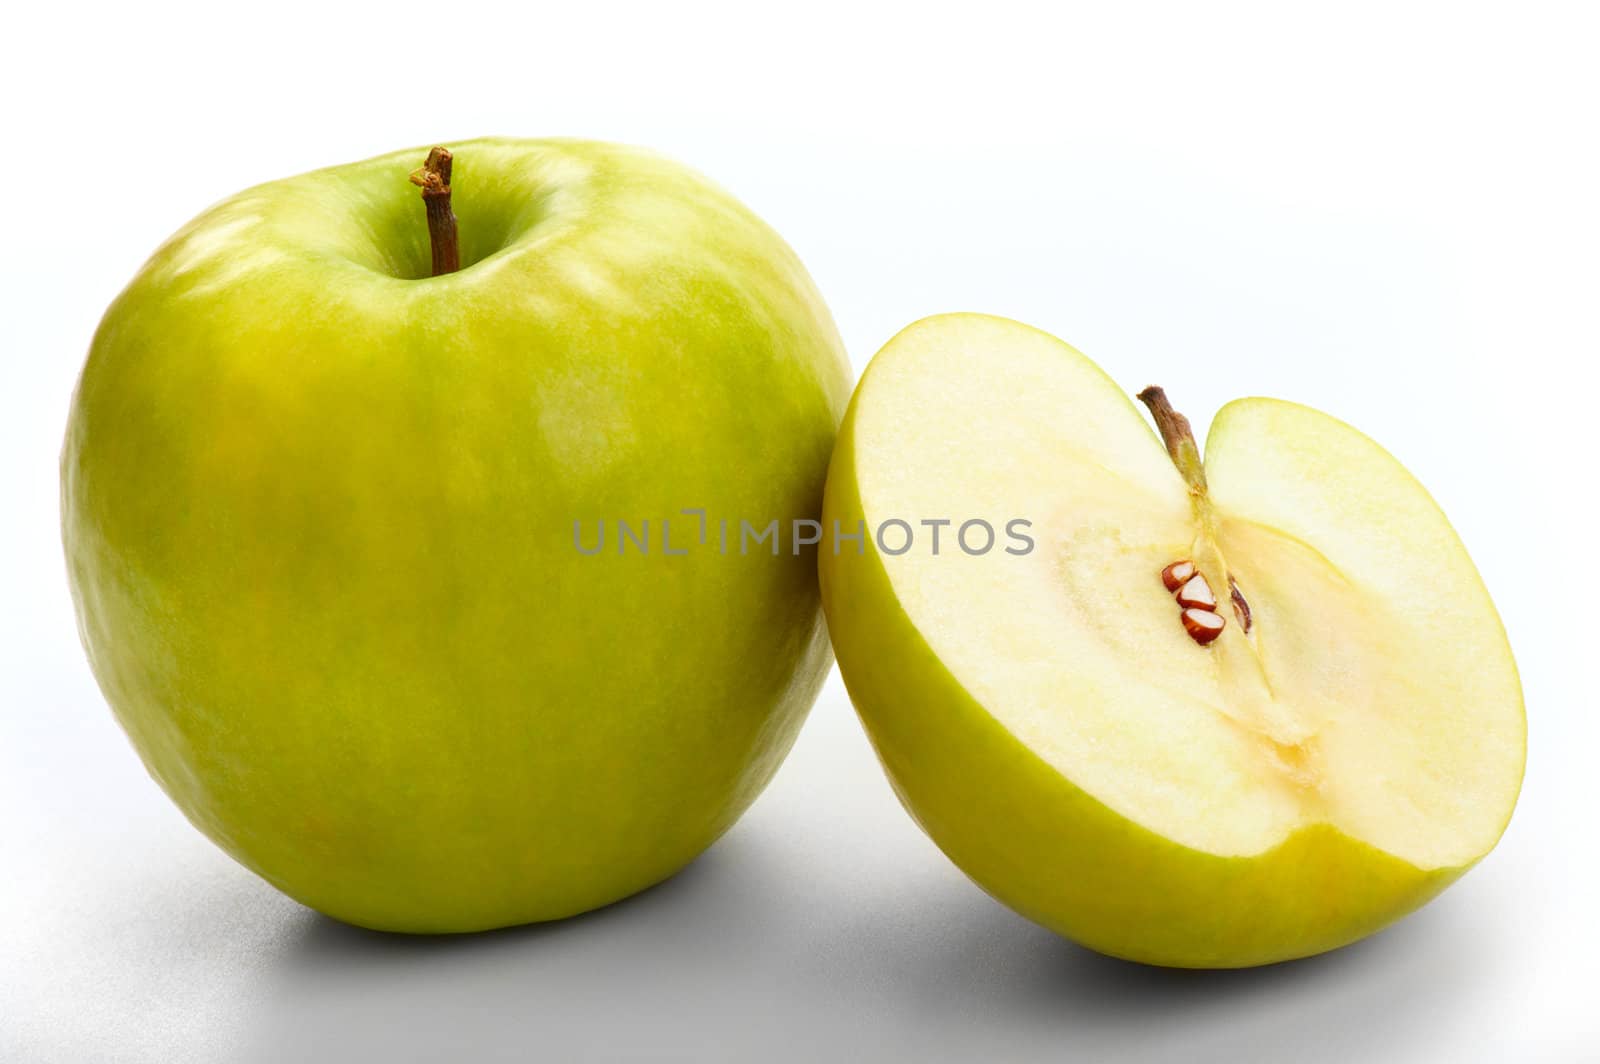 The ripe apples - whole and cut in half. A close up